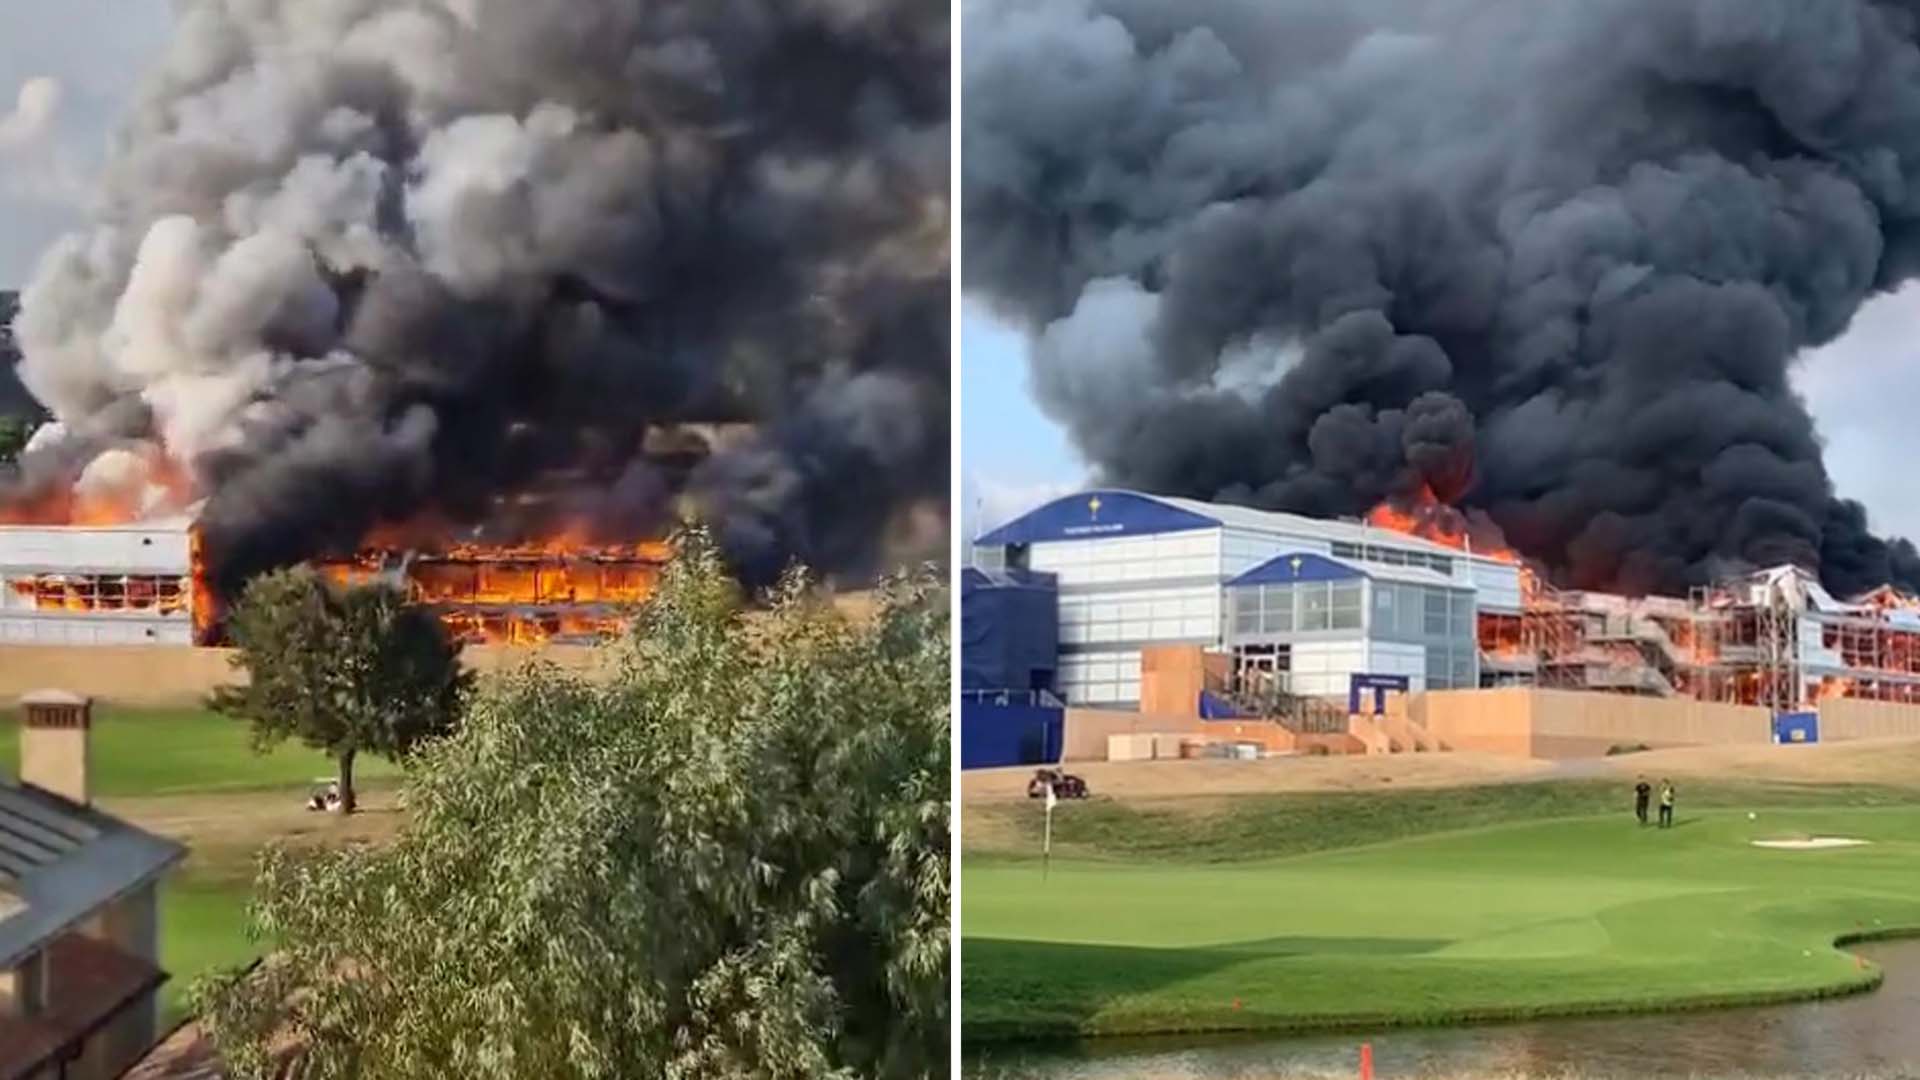 Ryder Cup Golf Course In Italy Engulfed In Flames: Marco Simone Golf And Country Club Suffers Fire